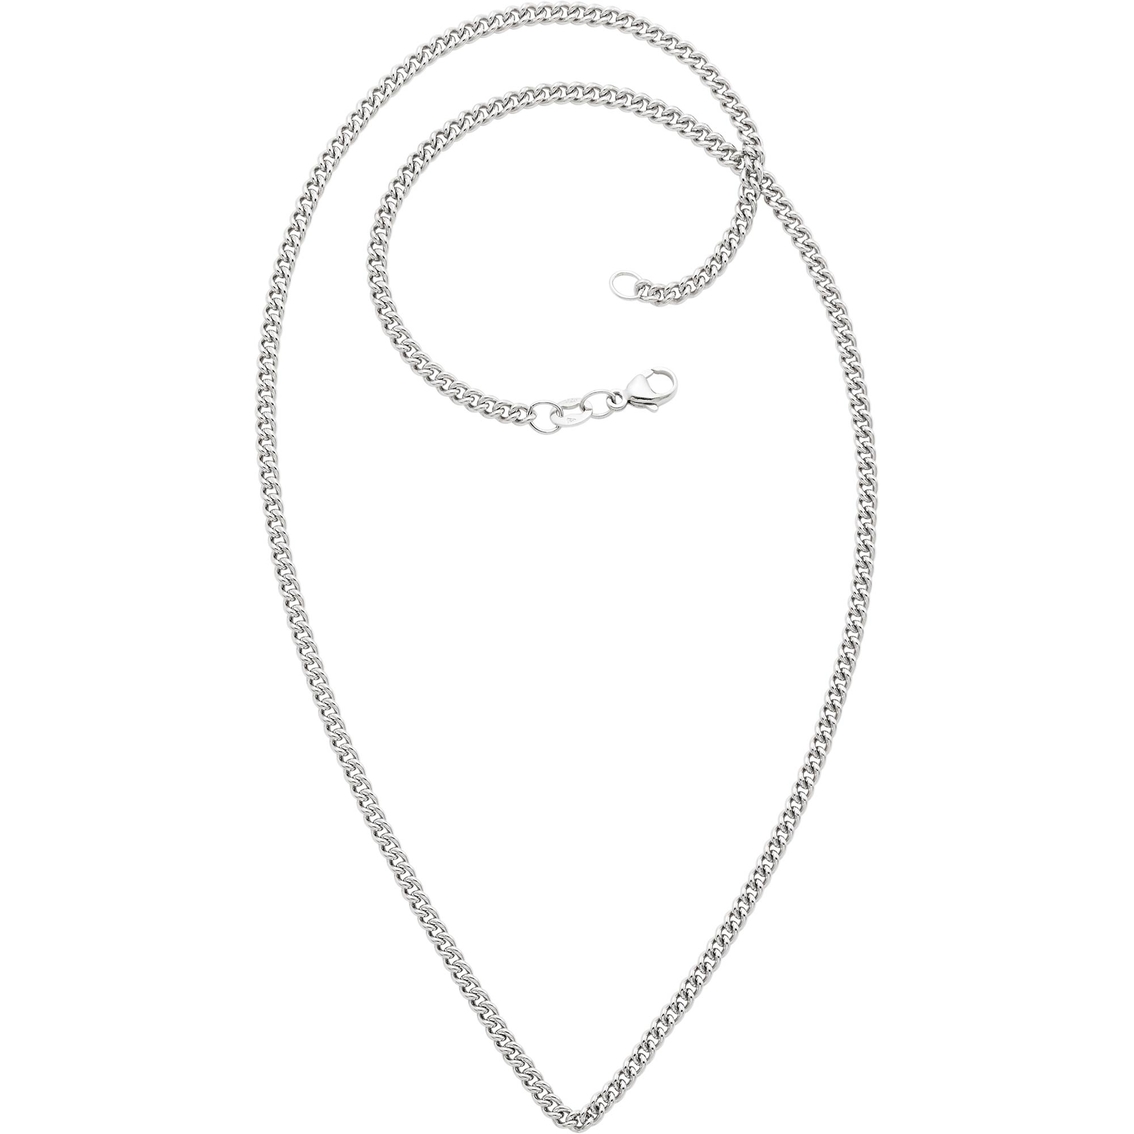 James Avery Medium Curb Chain | Silver Necklaces & Pendants | Jewelry ...